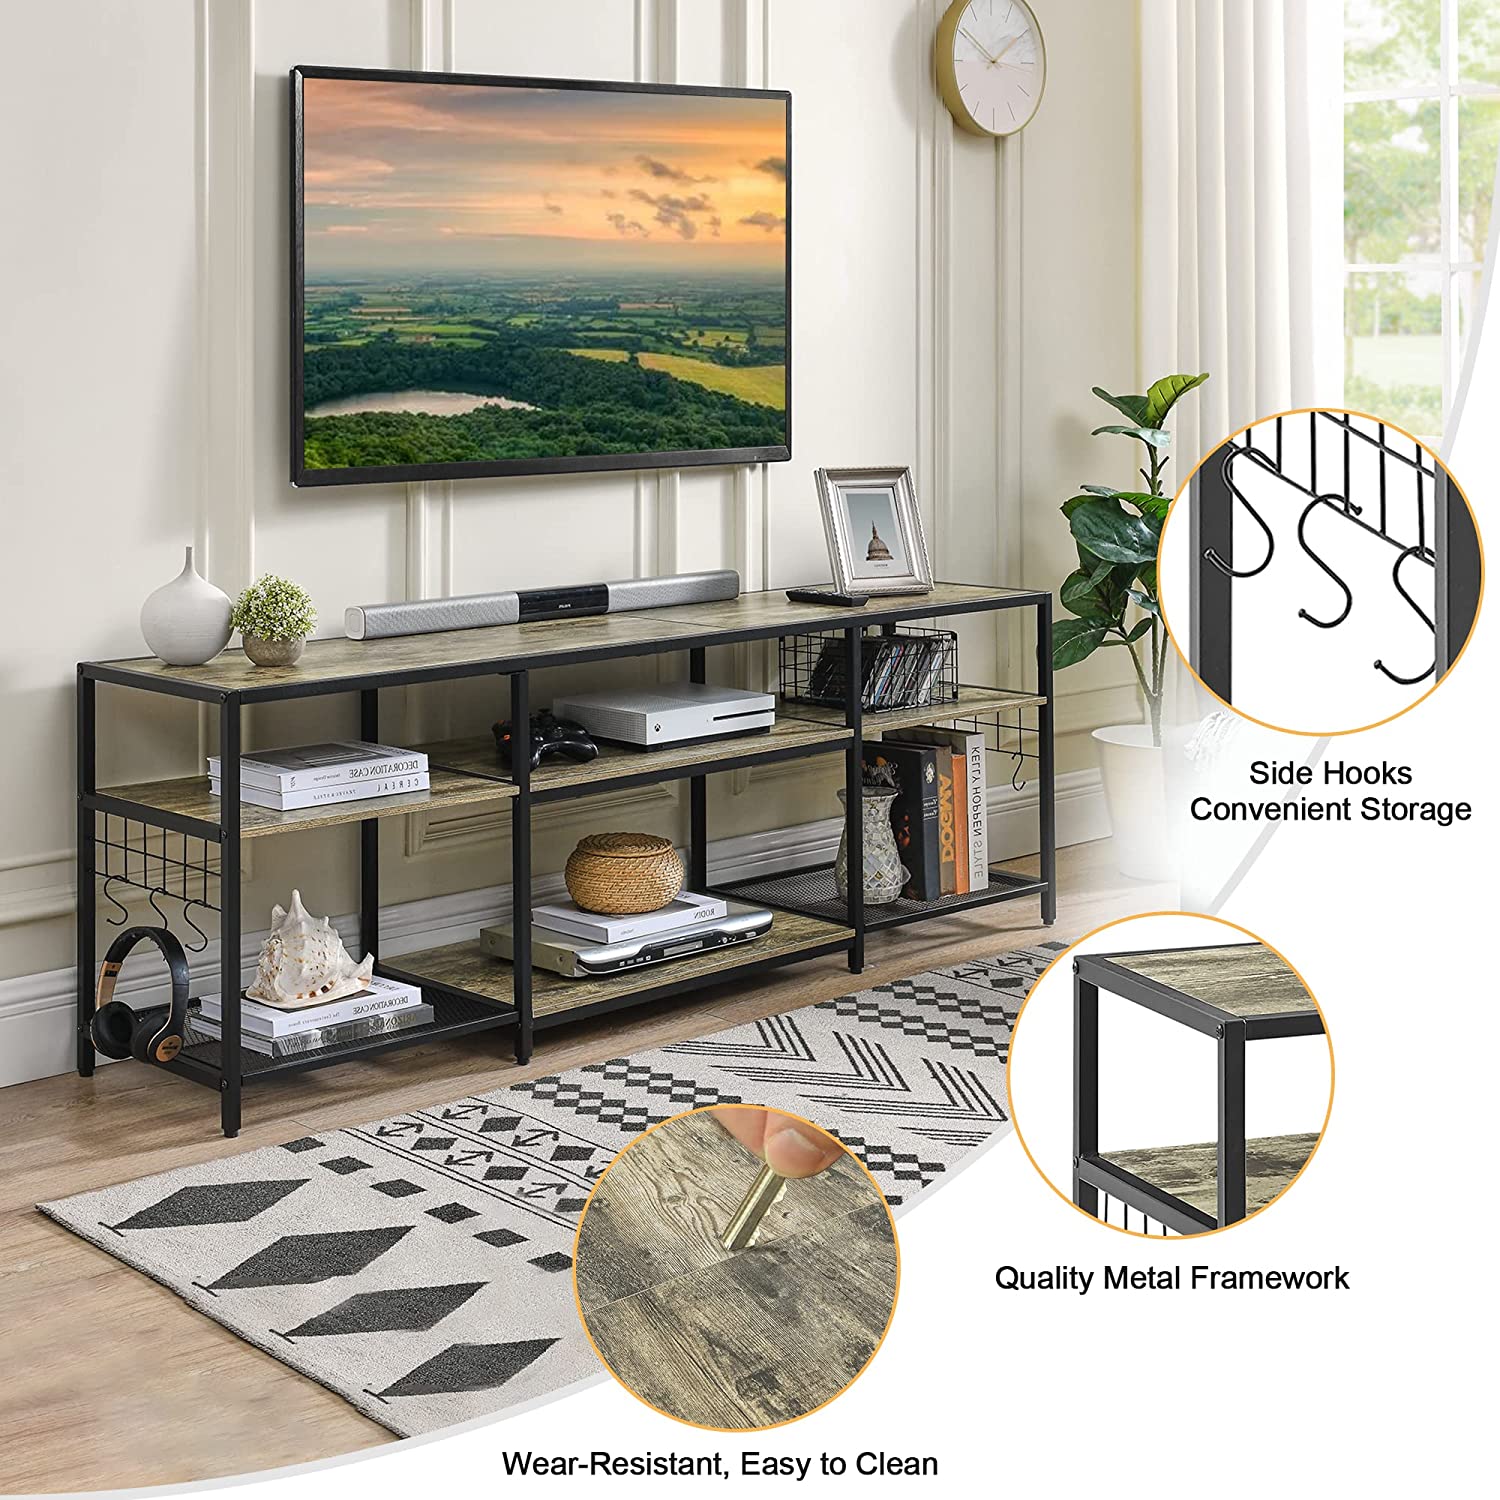 VECELO TV Stand Entertainment Center Media Console with 3-Tier Open Storage Shelves